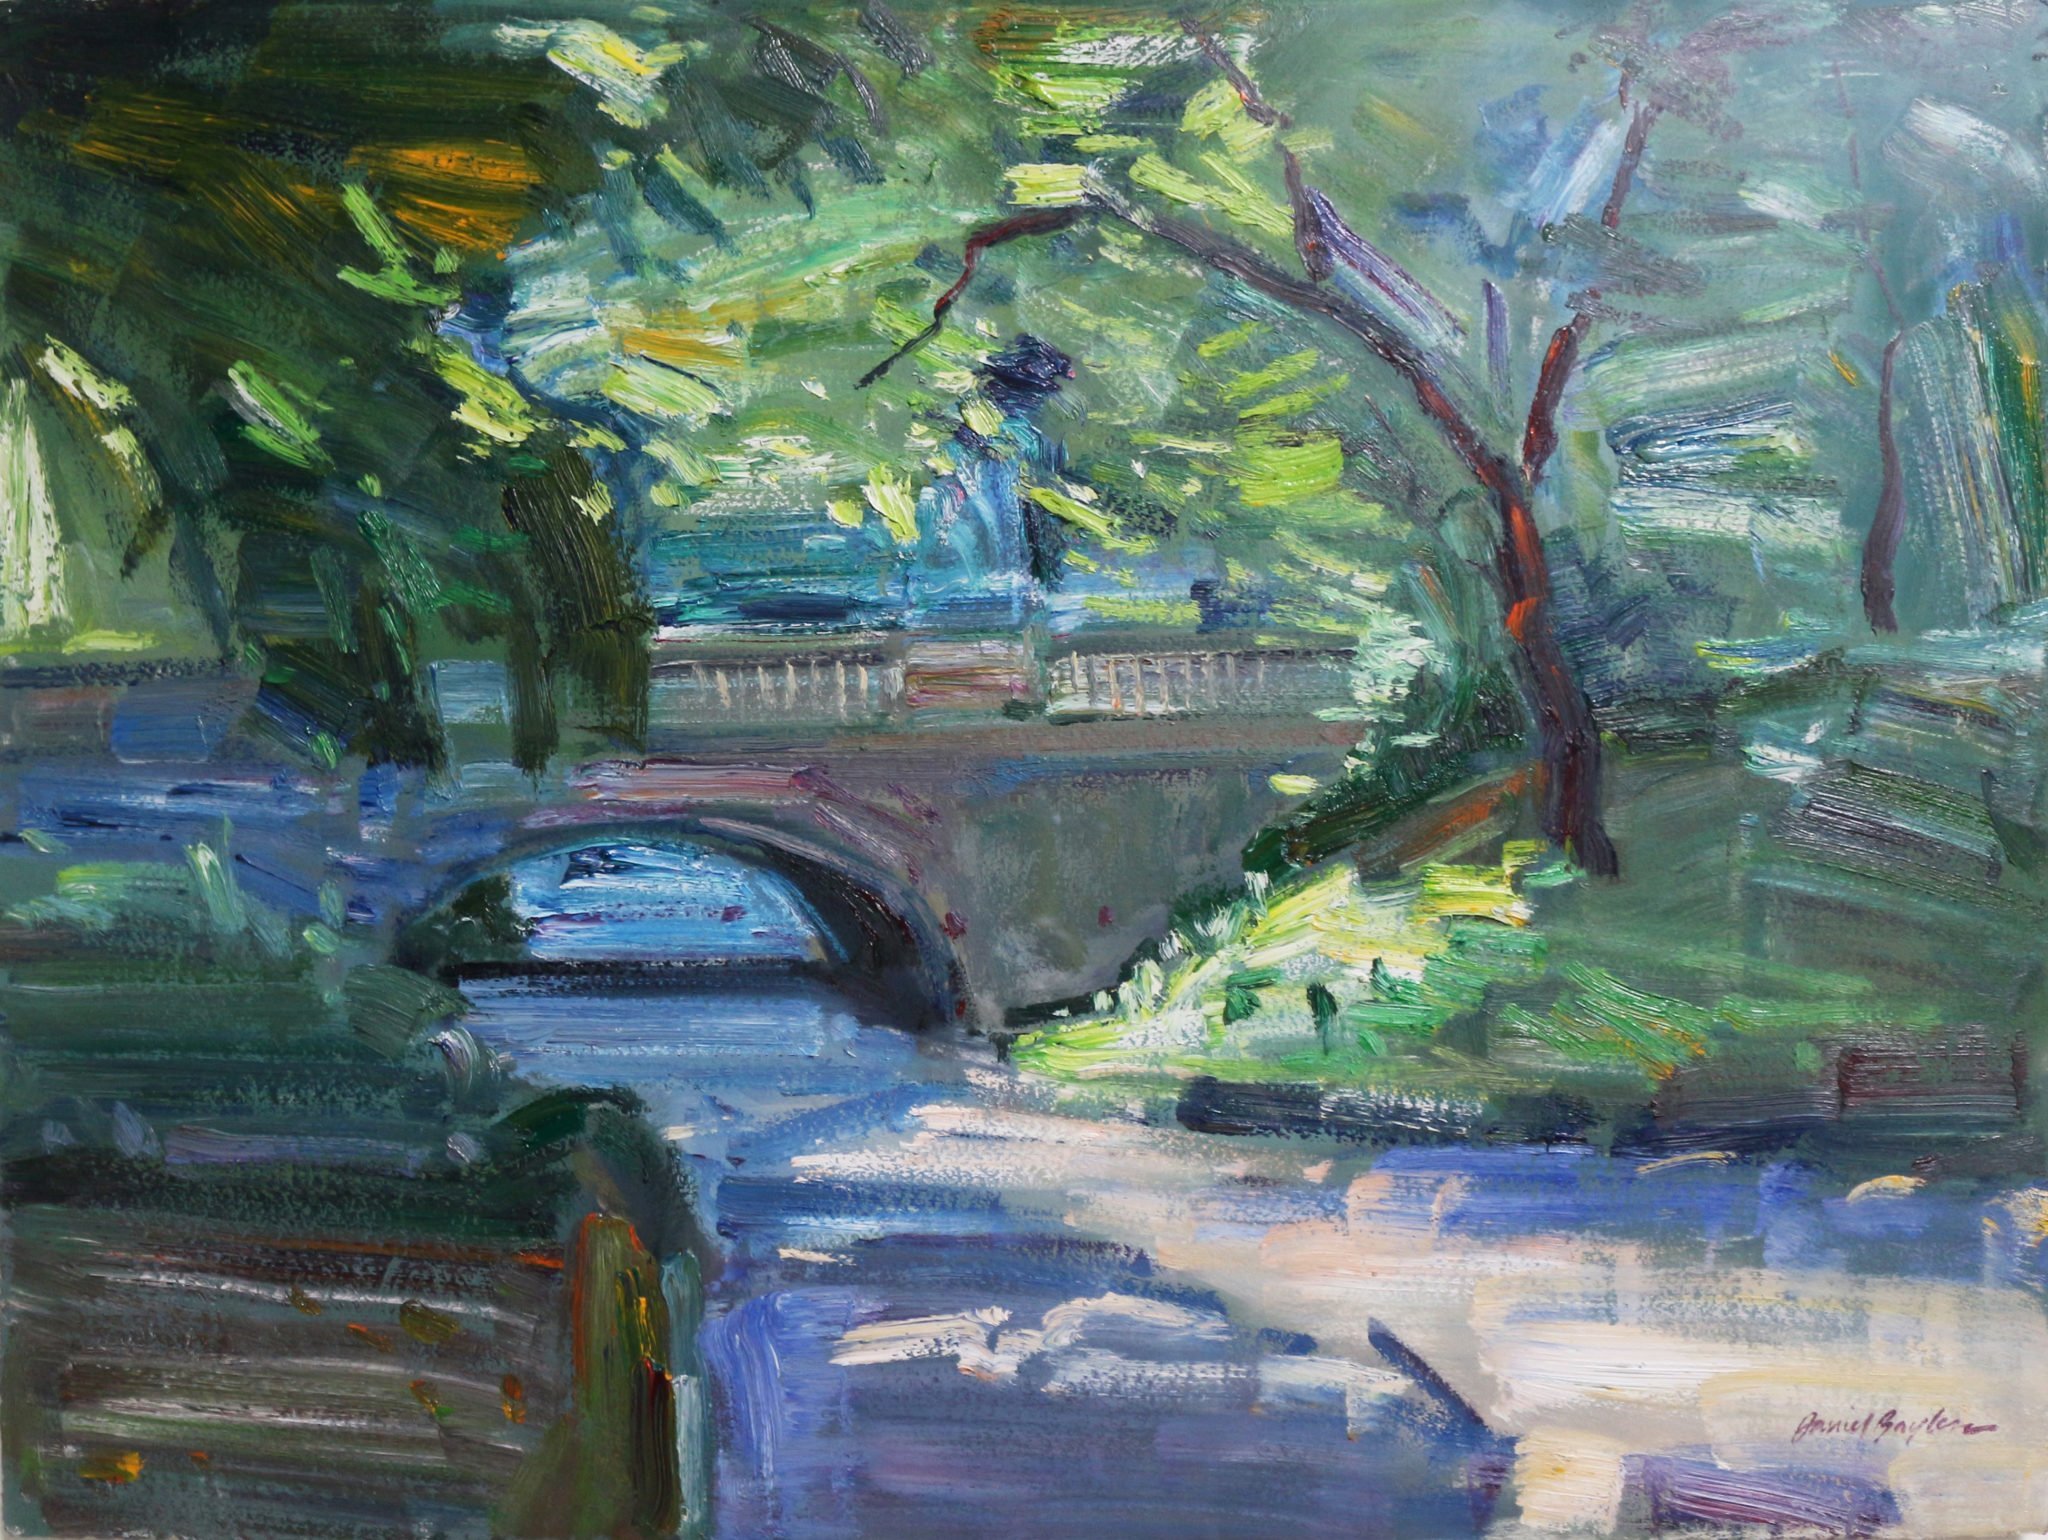 Oil on paper painting of a bridge in Central Park over a relaxing stream by Daniel Bayless